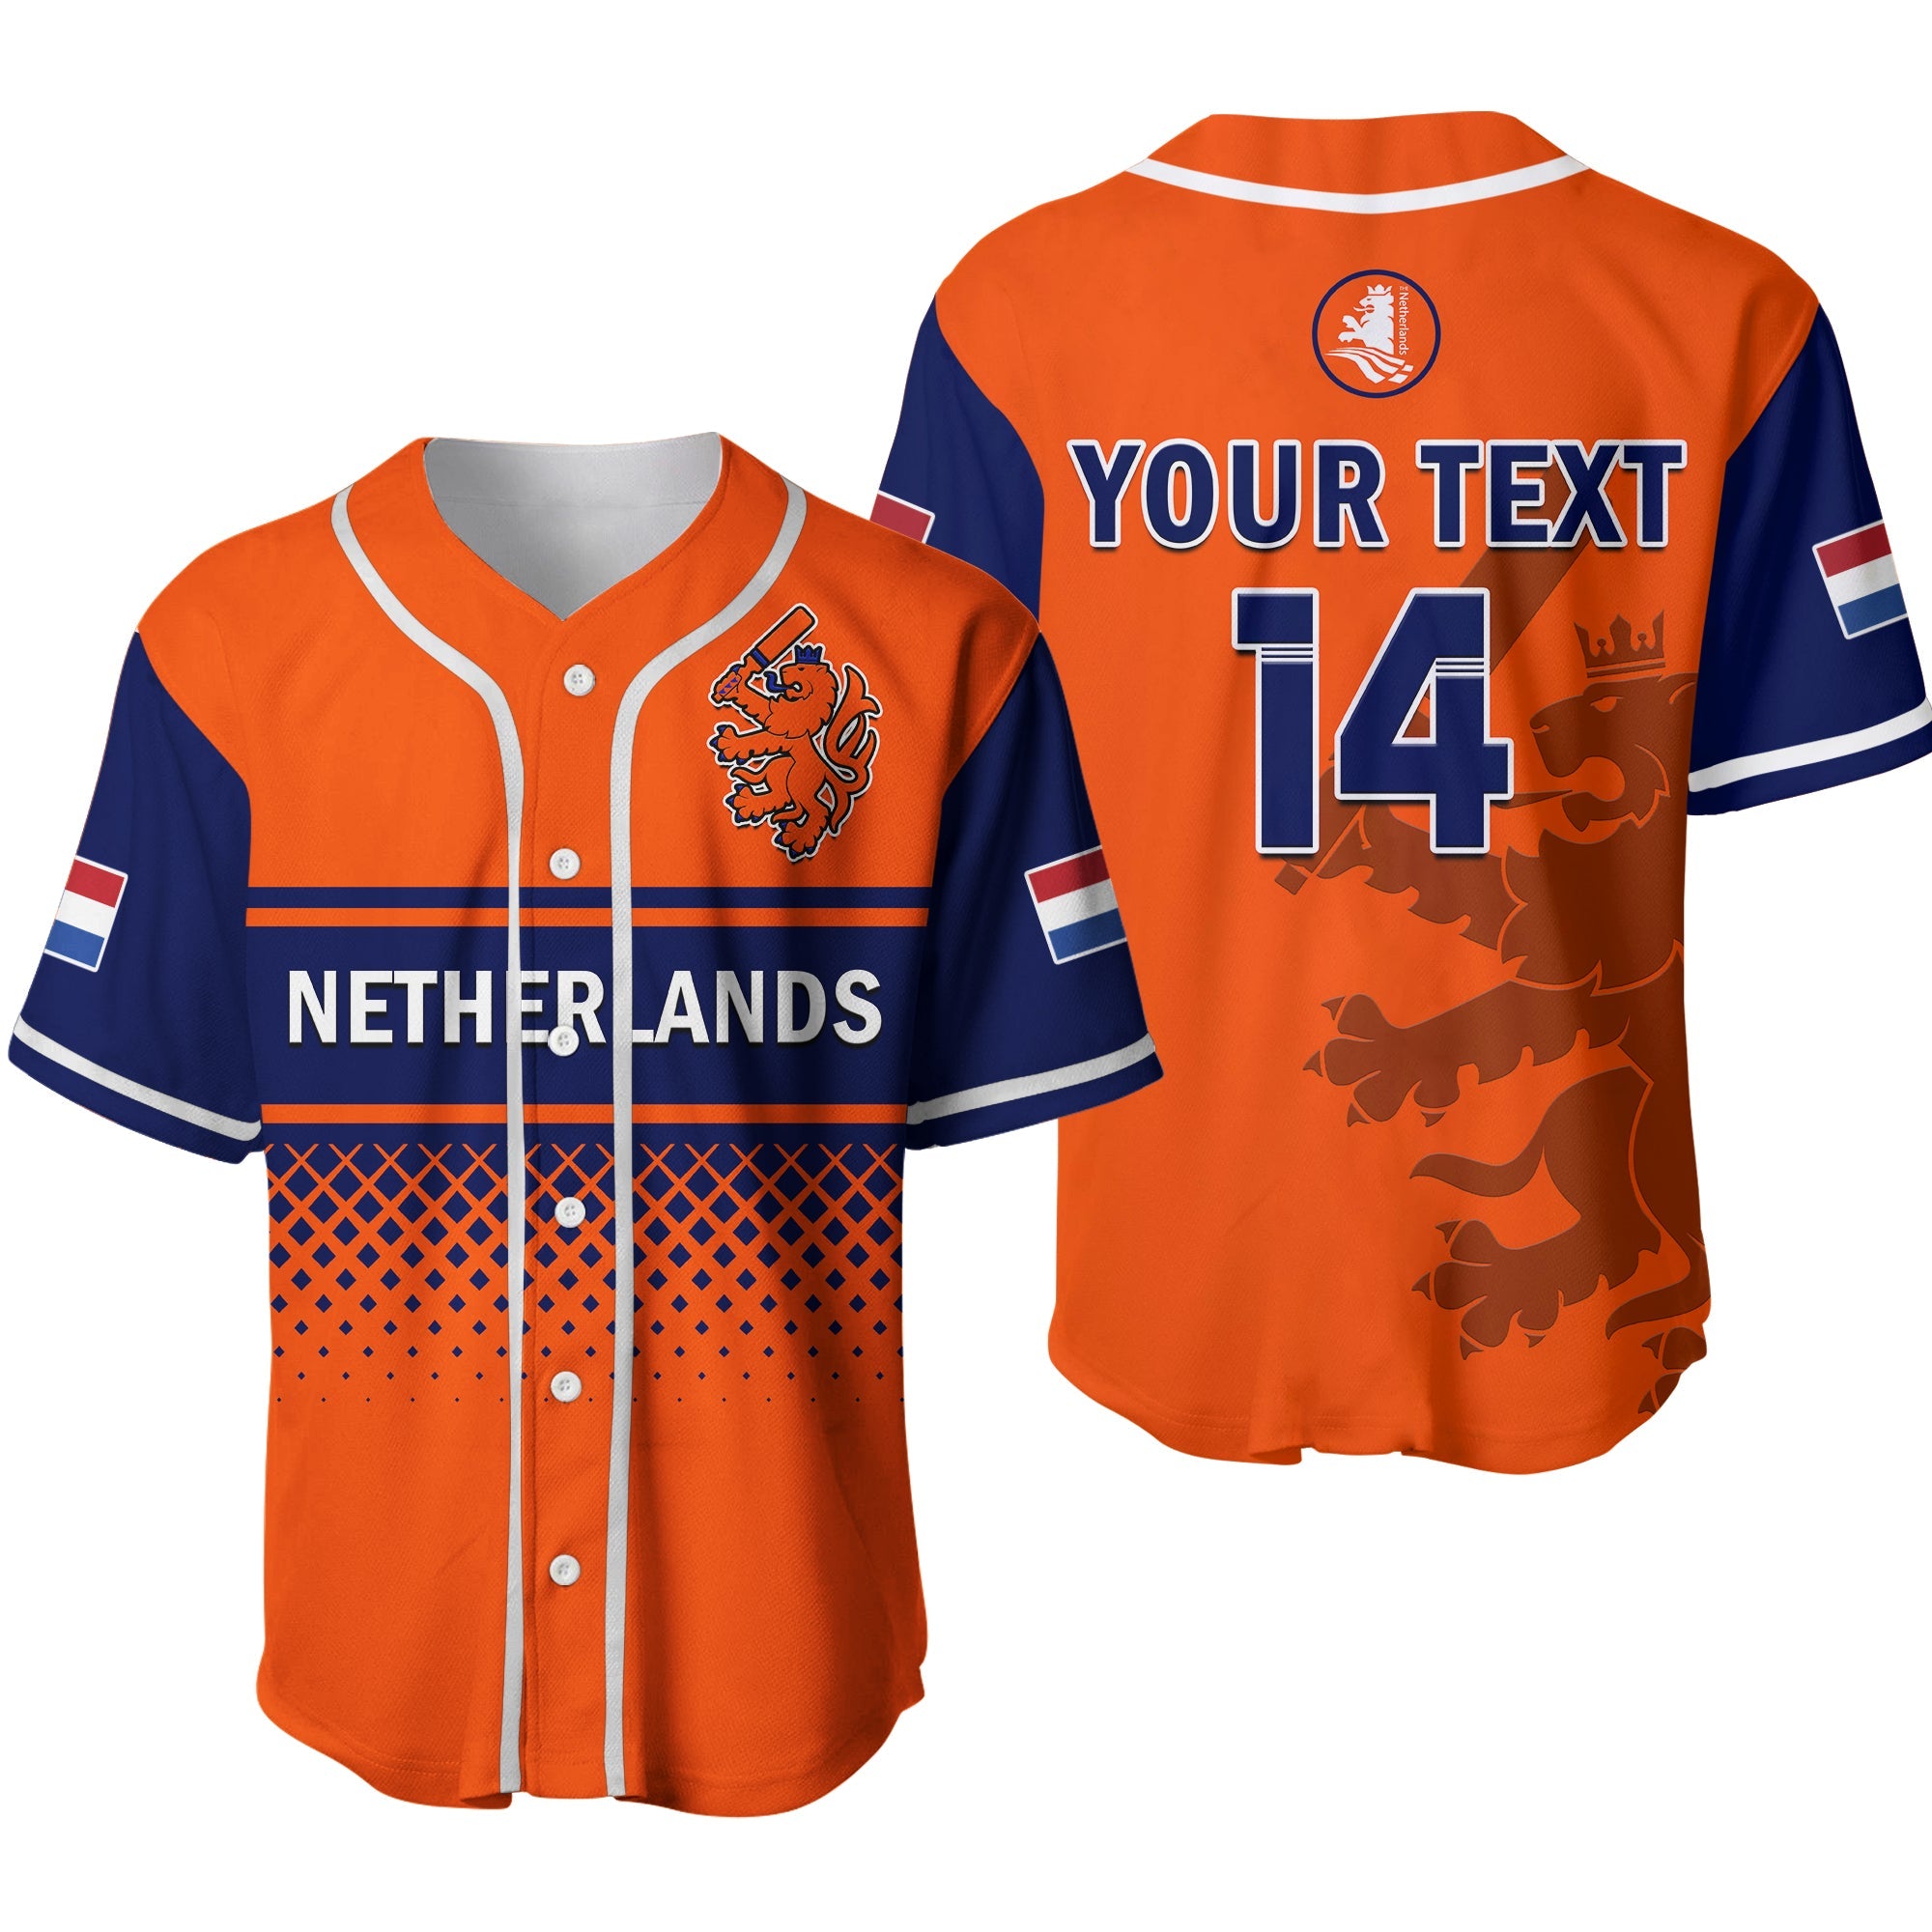 custom-text-and-number-netherlands-cricket-baseball-jersey-odi-simple-orange-style-ver02